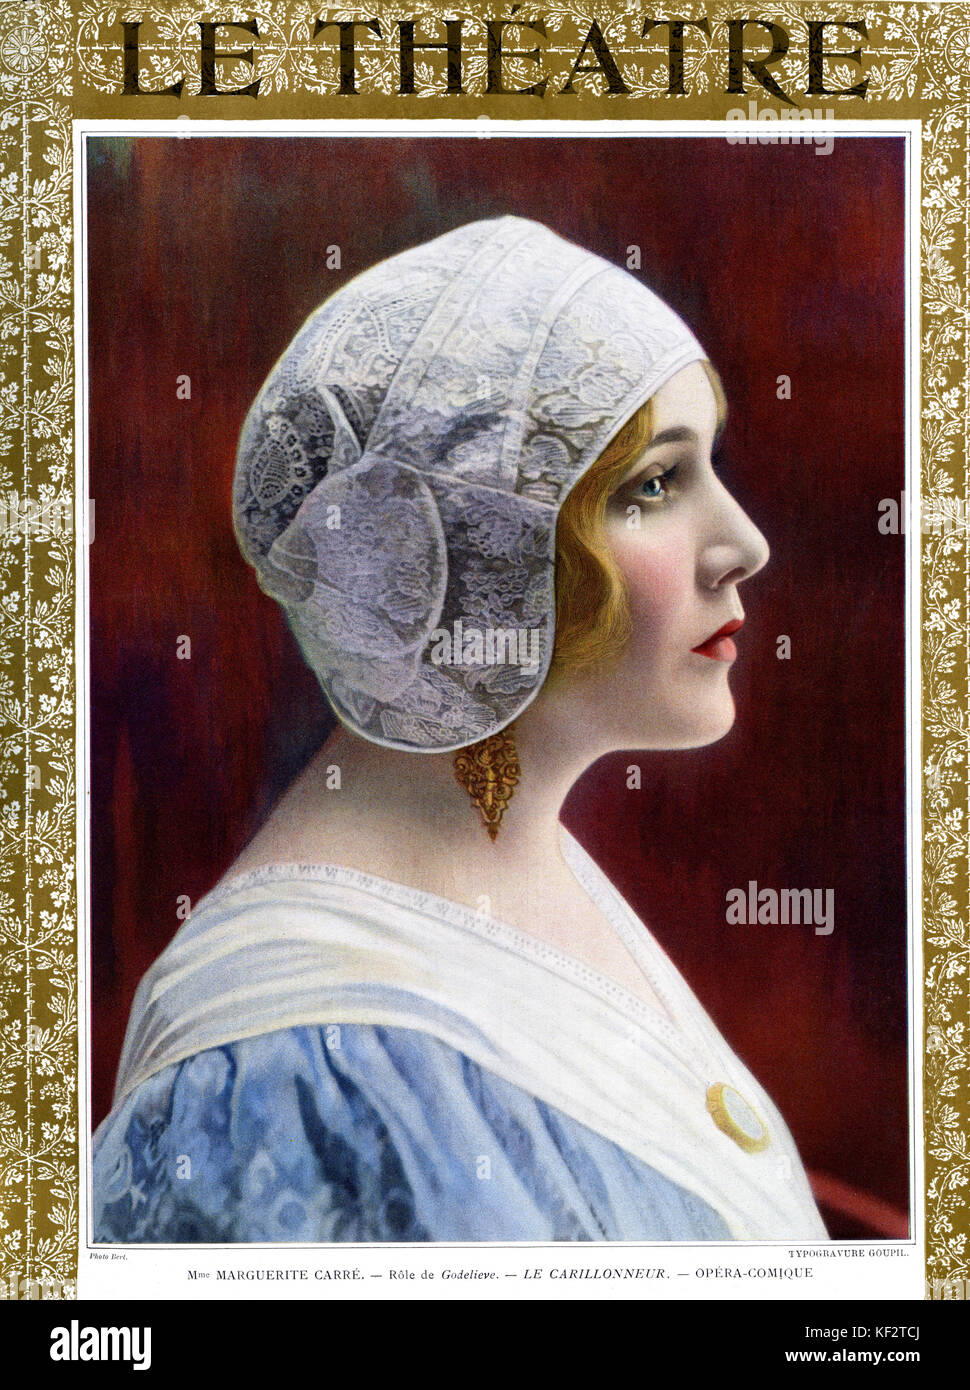 Marguerite Carré as Godelieve in ' Le Carillonneur ' on the cover of Le Theatre, 1913. ( Bert.) Le Carillonneur (The Bells of Bruges) is an opera  by Belgian author Georges Rodenbach. Stock Photo